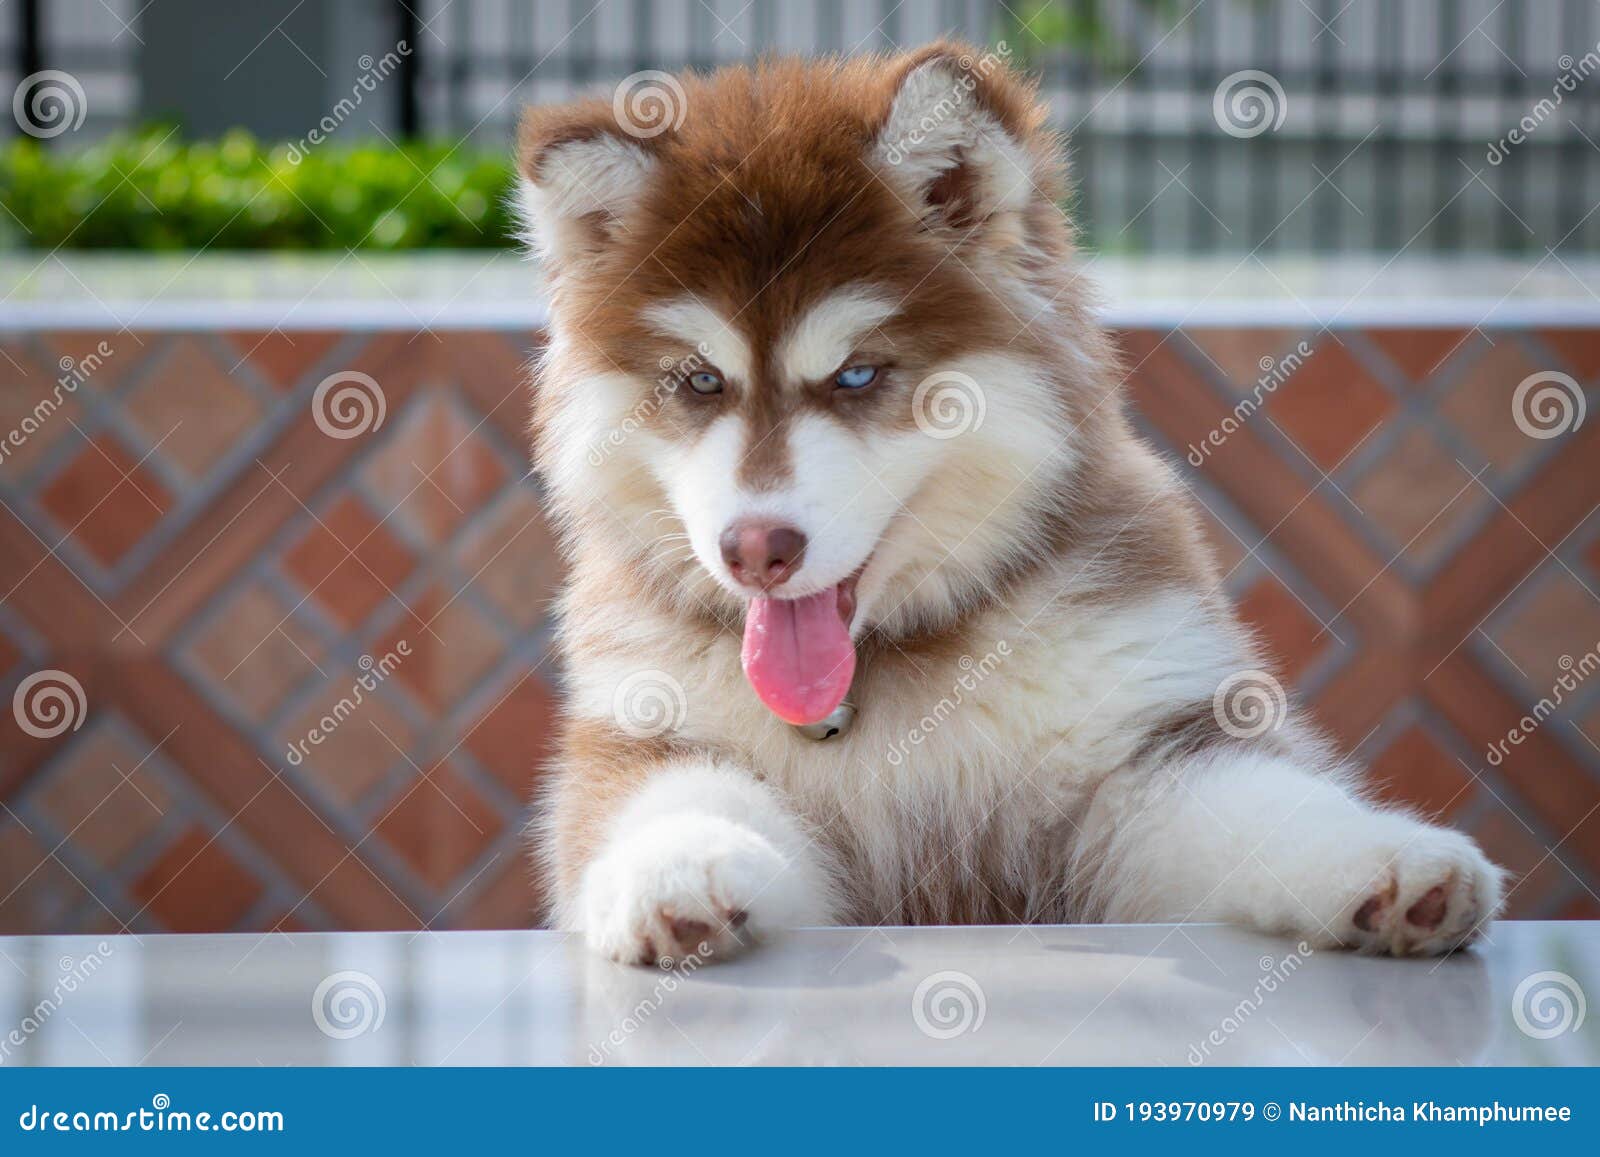 red siberian husky puppies with blue eyes